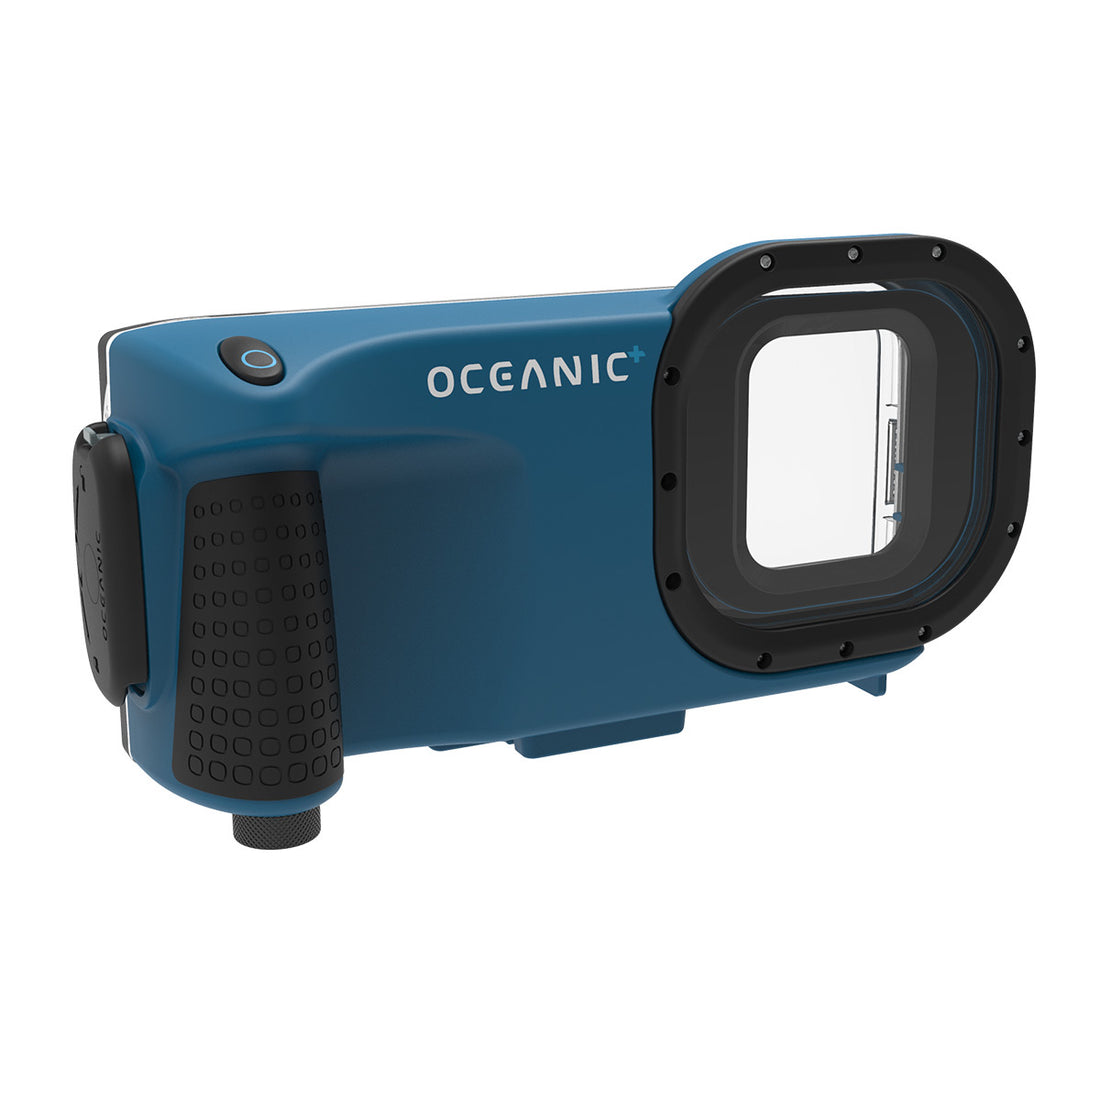 Apple and Oceanic now Enter the Dive World with the new Iphone Underwater Camera and Dive Computer